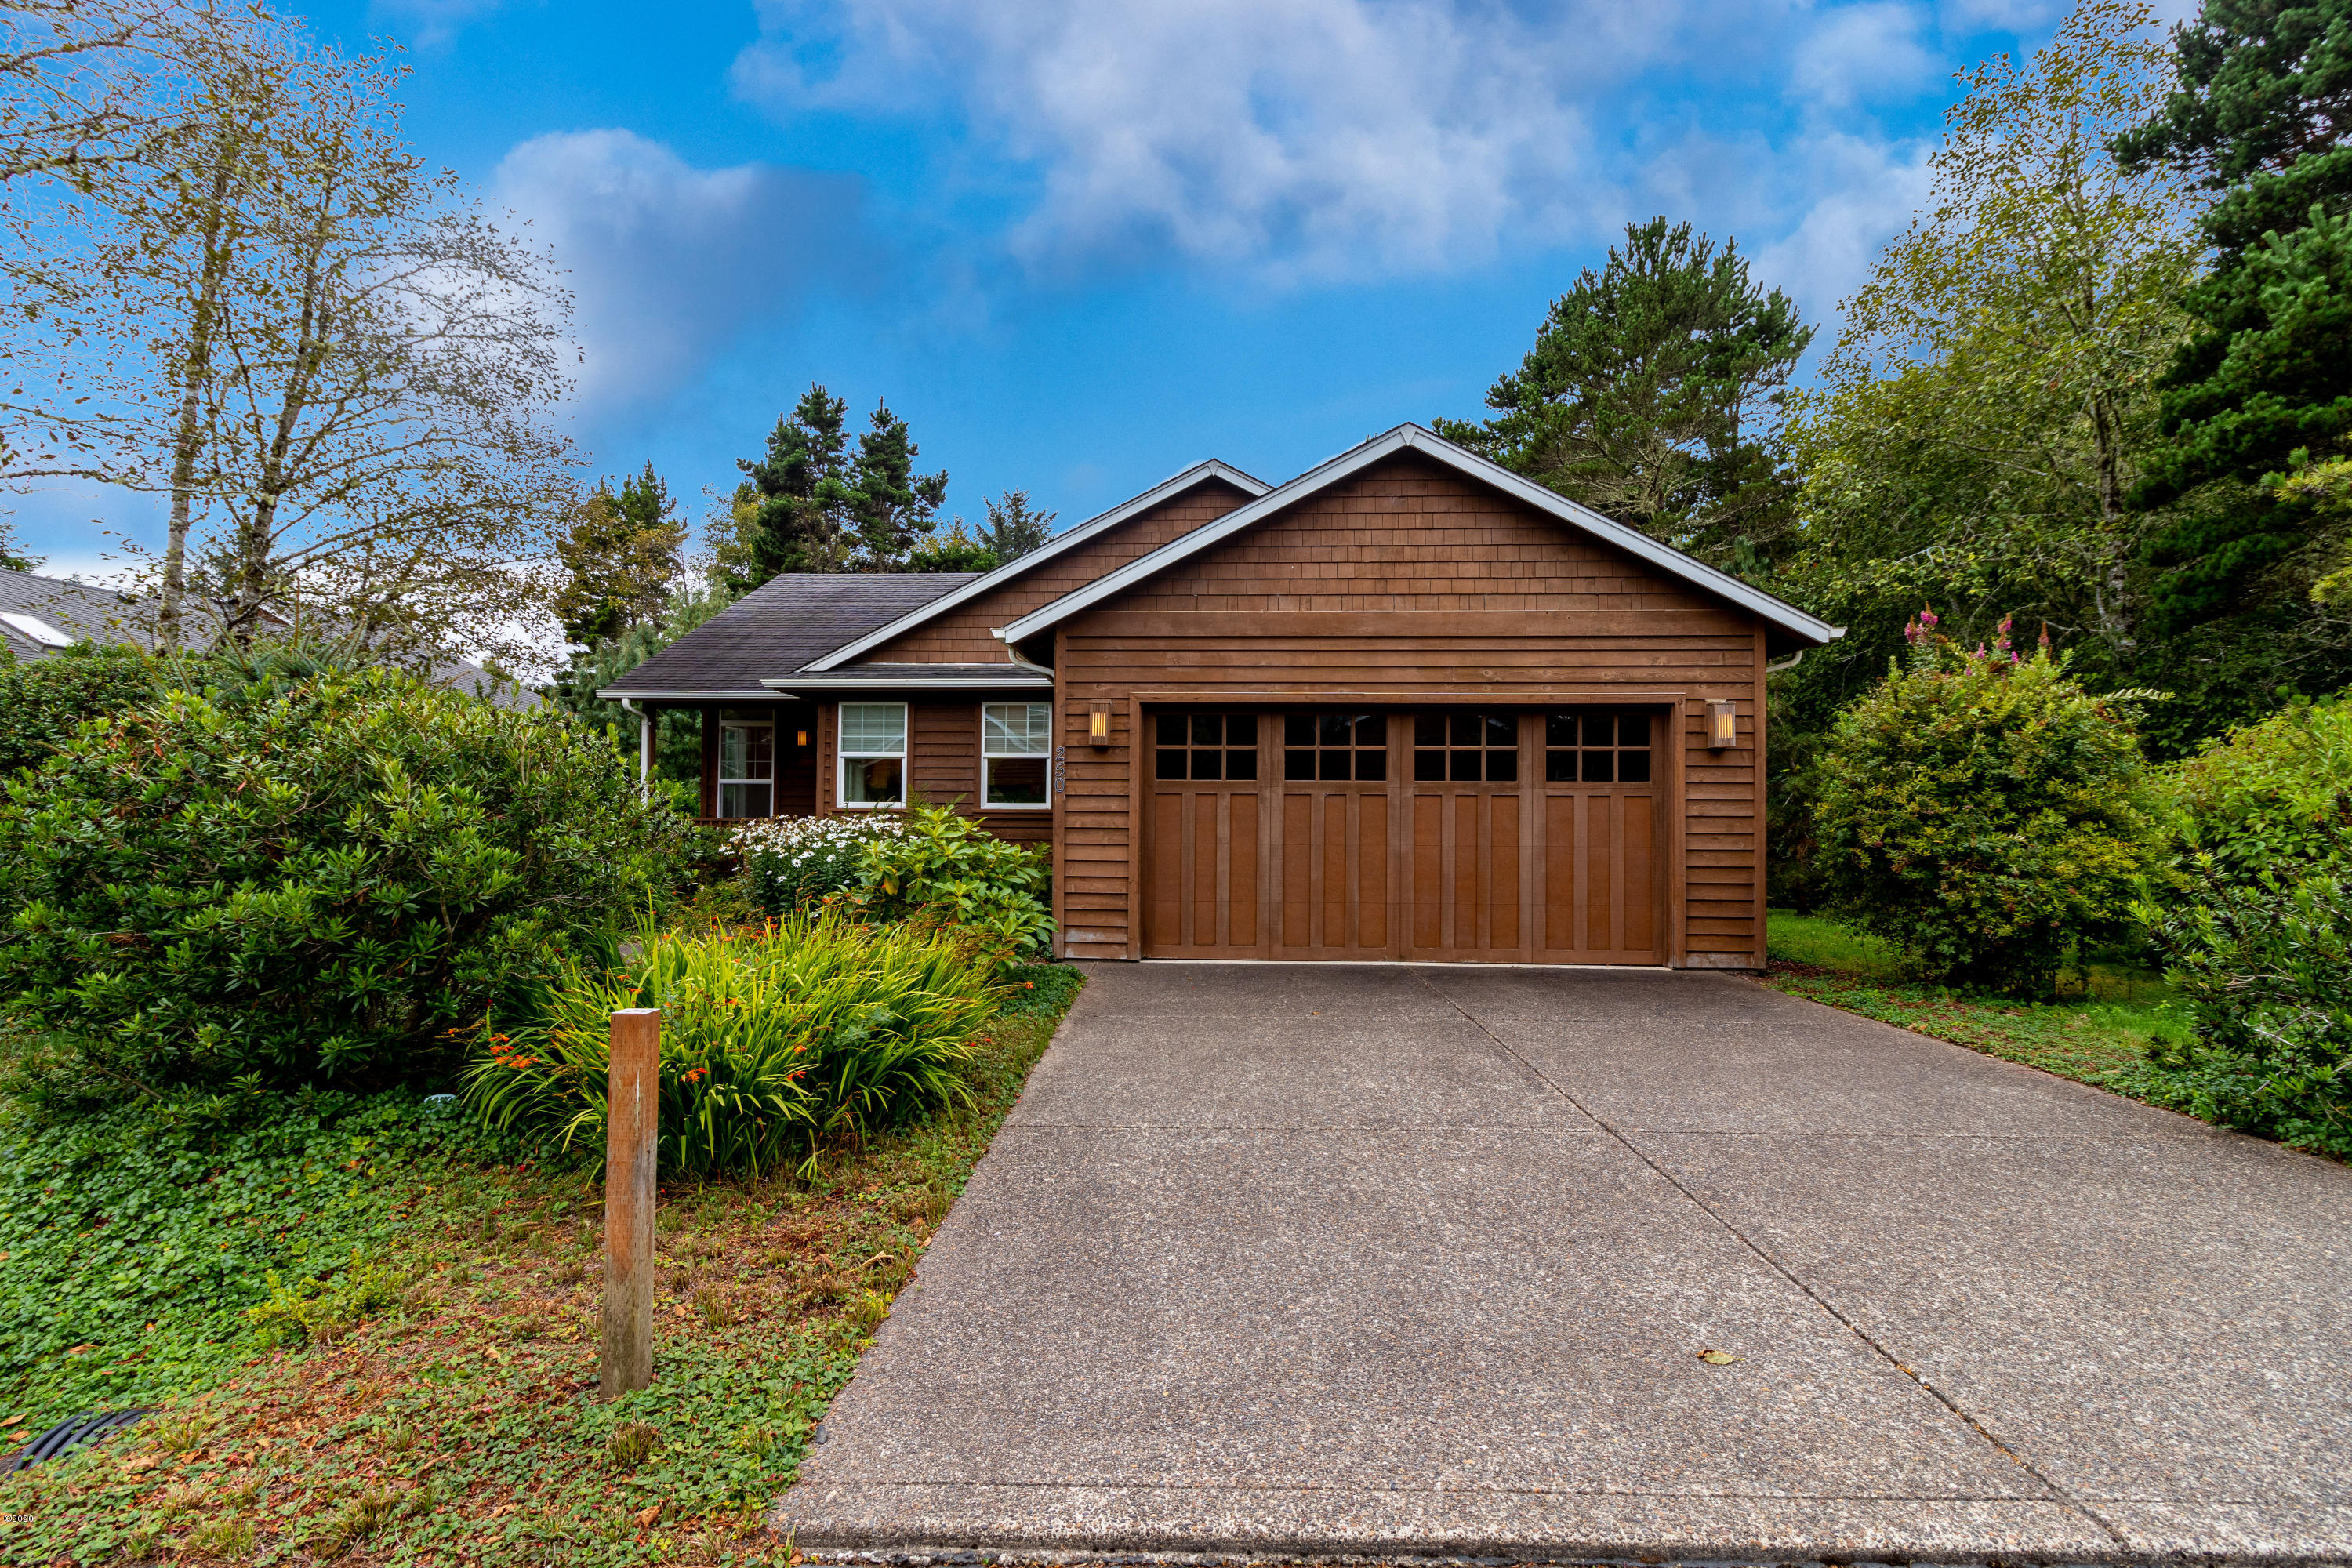 250 SW Shining Mist Depoe Bay, Gleneden Beach, Lincoln City, Newport, Otis, Rose Lodge, Seal Rock, Waldport, Yachats, To Home Listings - Amy Plechaty, Emerald Coast Realty Real Estate, homes for sale, property for sale